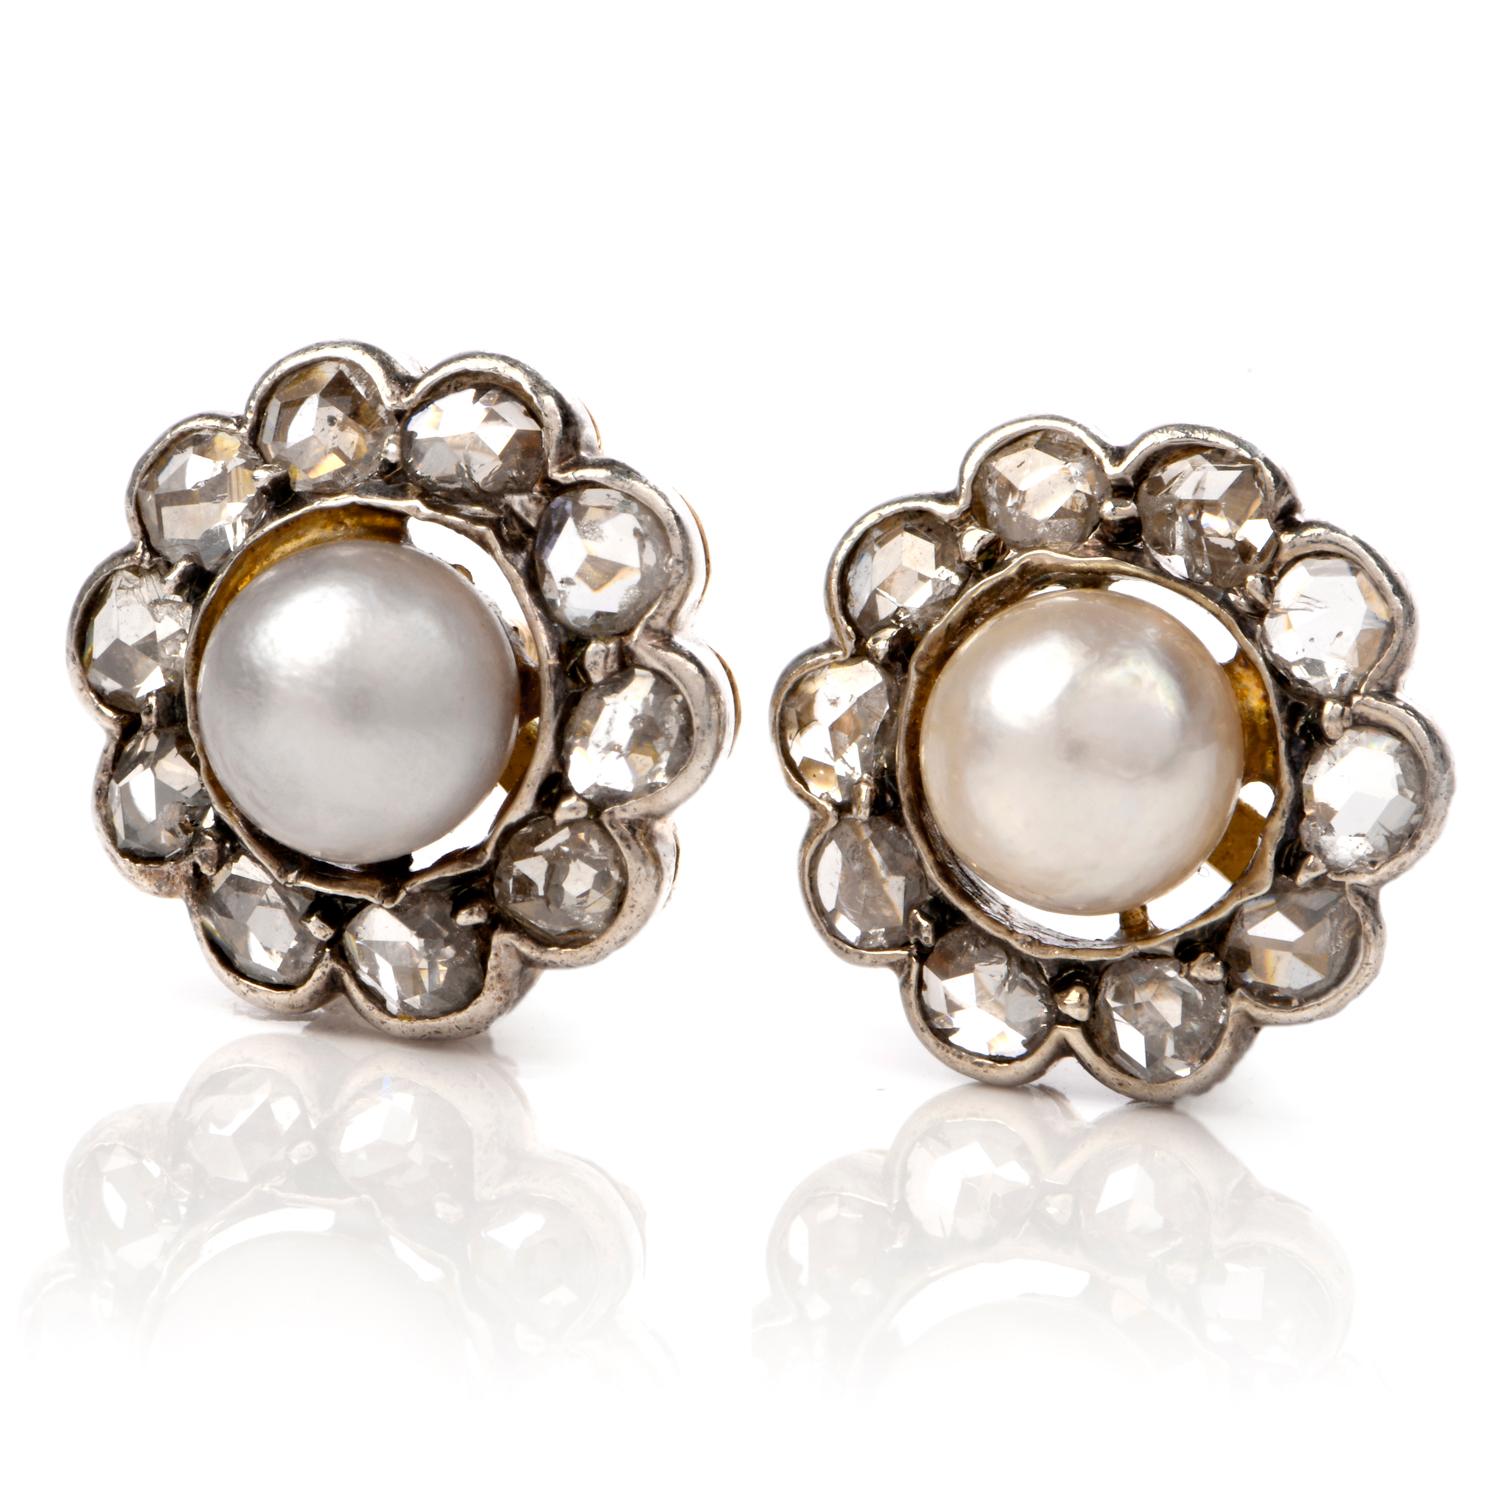 These whimsical flower earrings are crafted in a combination of –karat white and yellow gold. Depicting small flowers with a pair of pearls measuring 6mm in diameter, simulating the flower bud. Petals are simulated by 24 rose-cut bezel set diamonds,